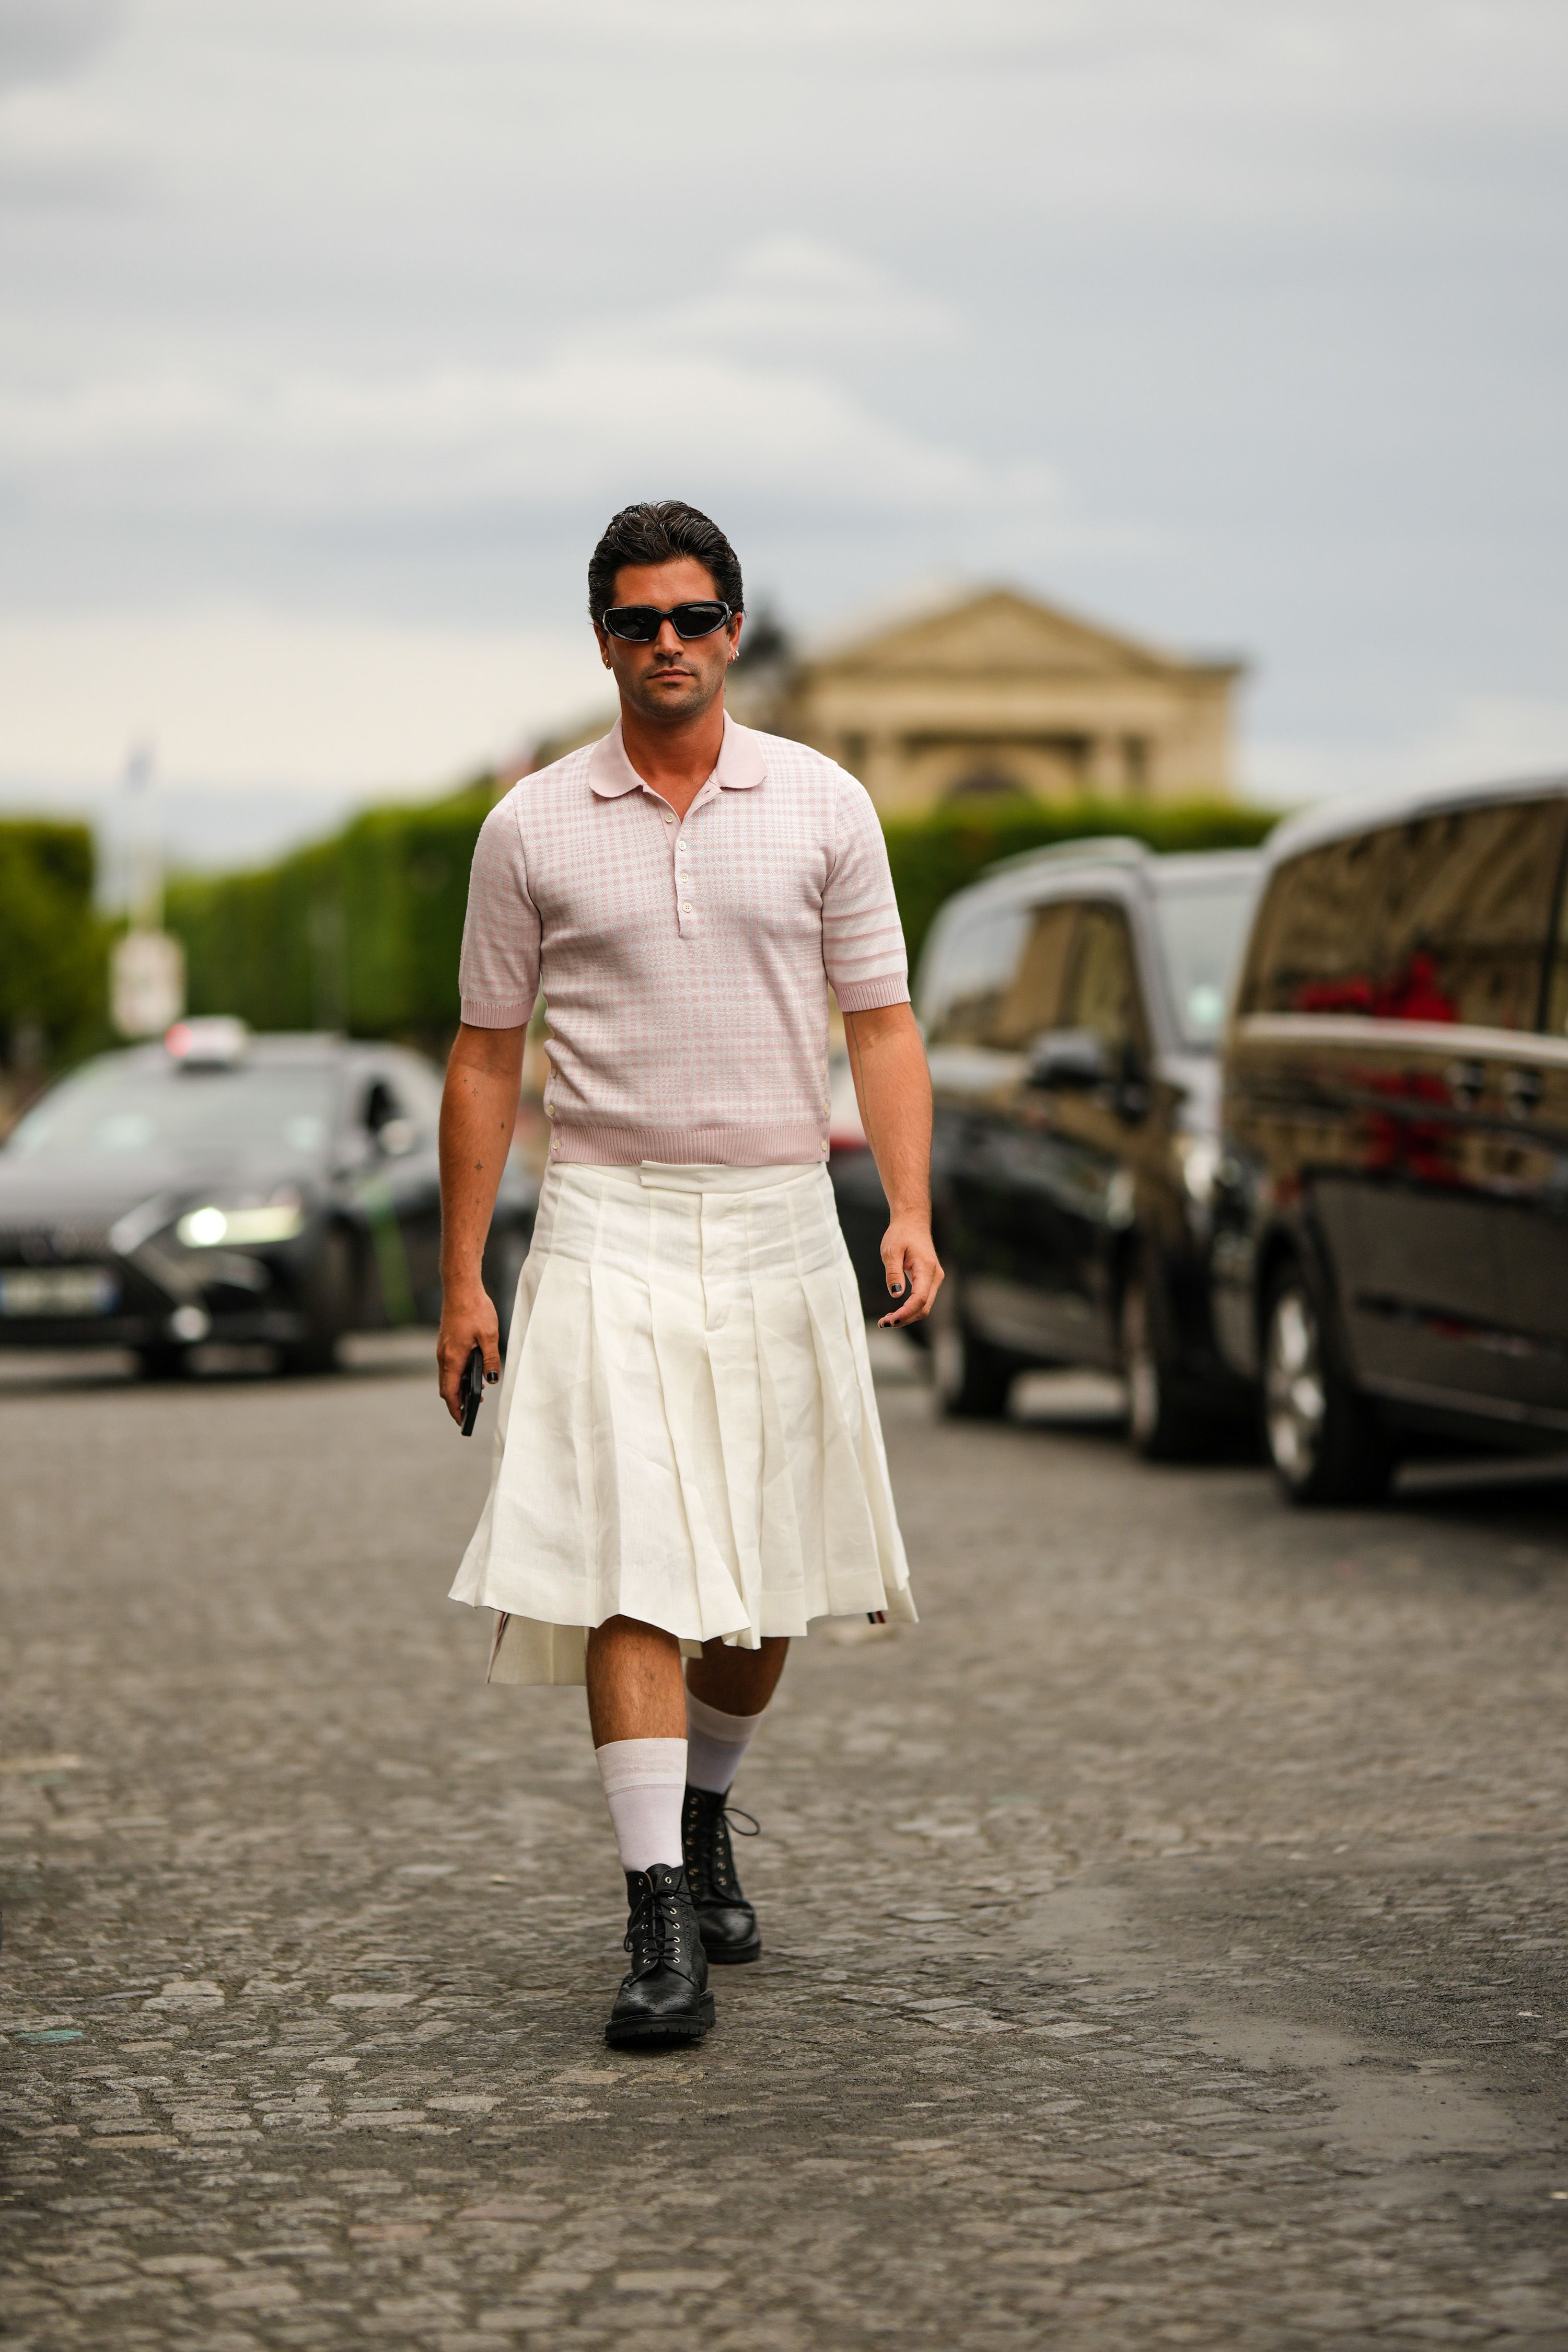 Men's skirts: From Brad Pitt to Lil Nas X, more men are adopting the  fashion | CNN